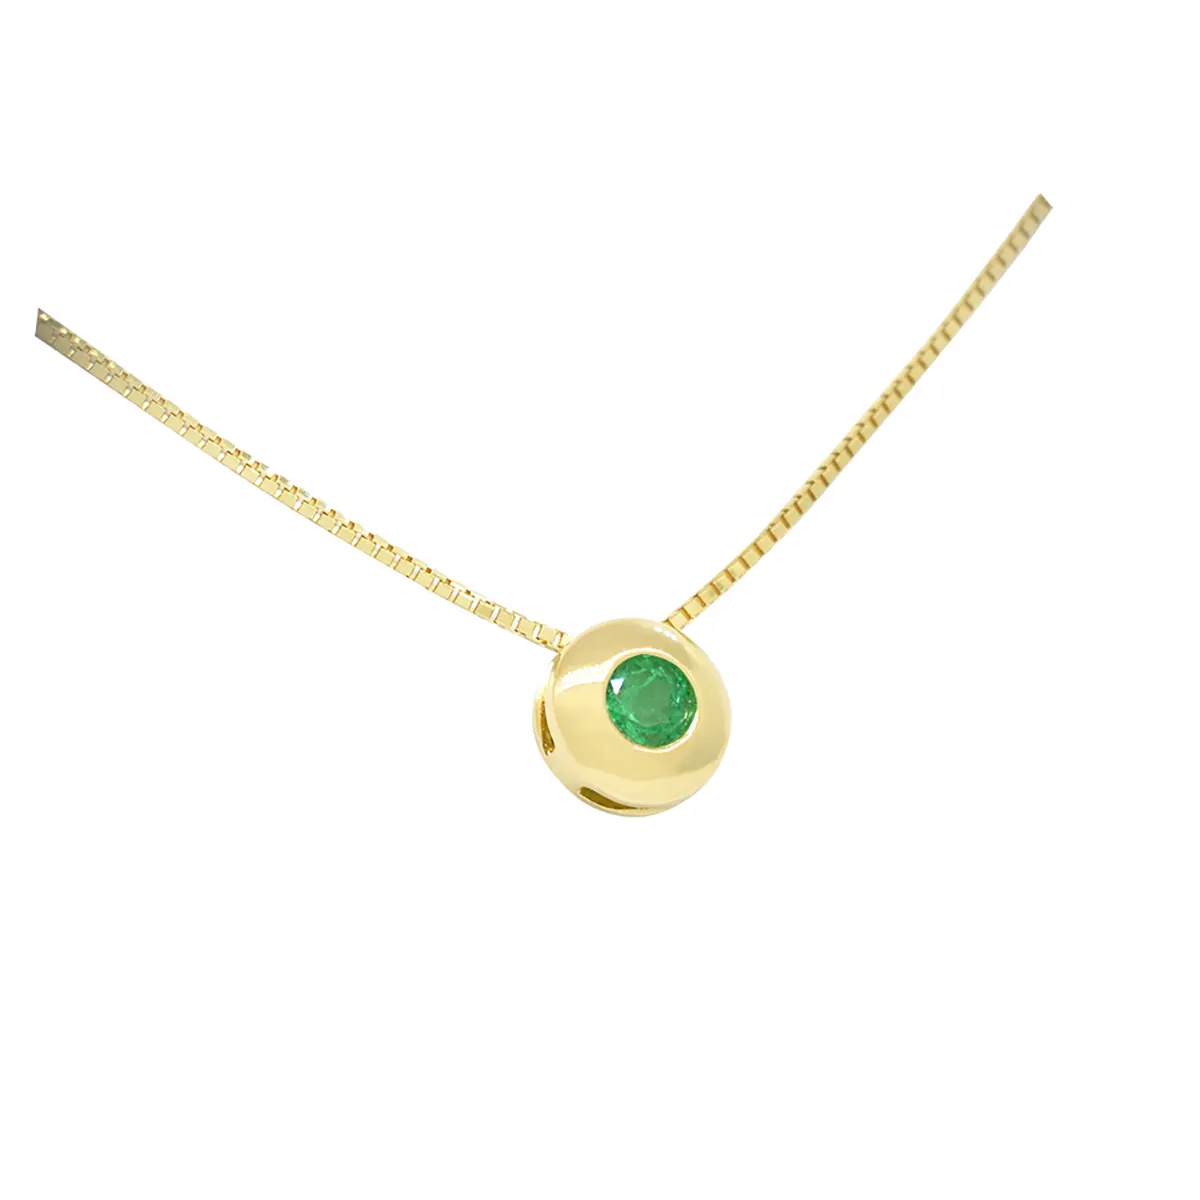 Solitaire Emerald Necklace in 18K Gold Bezel Set with Round Emerald